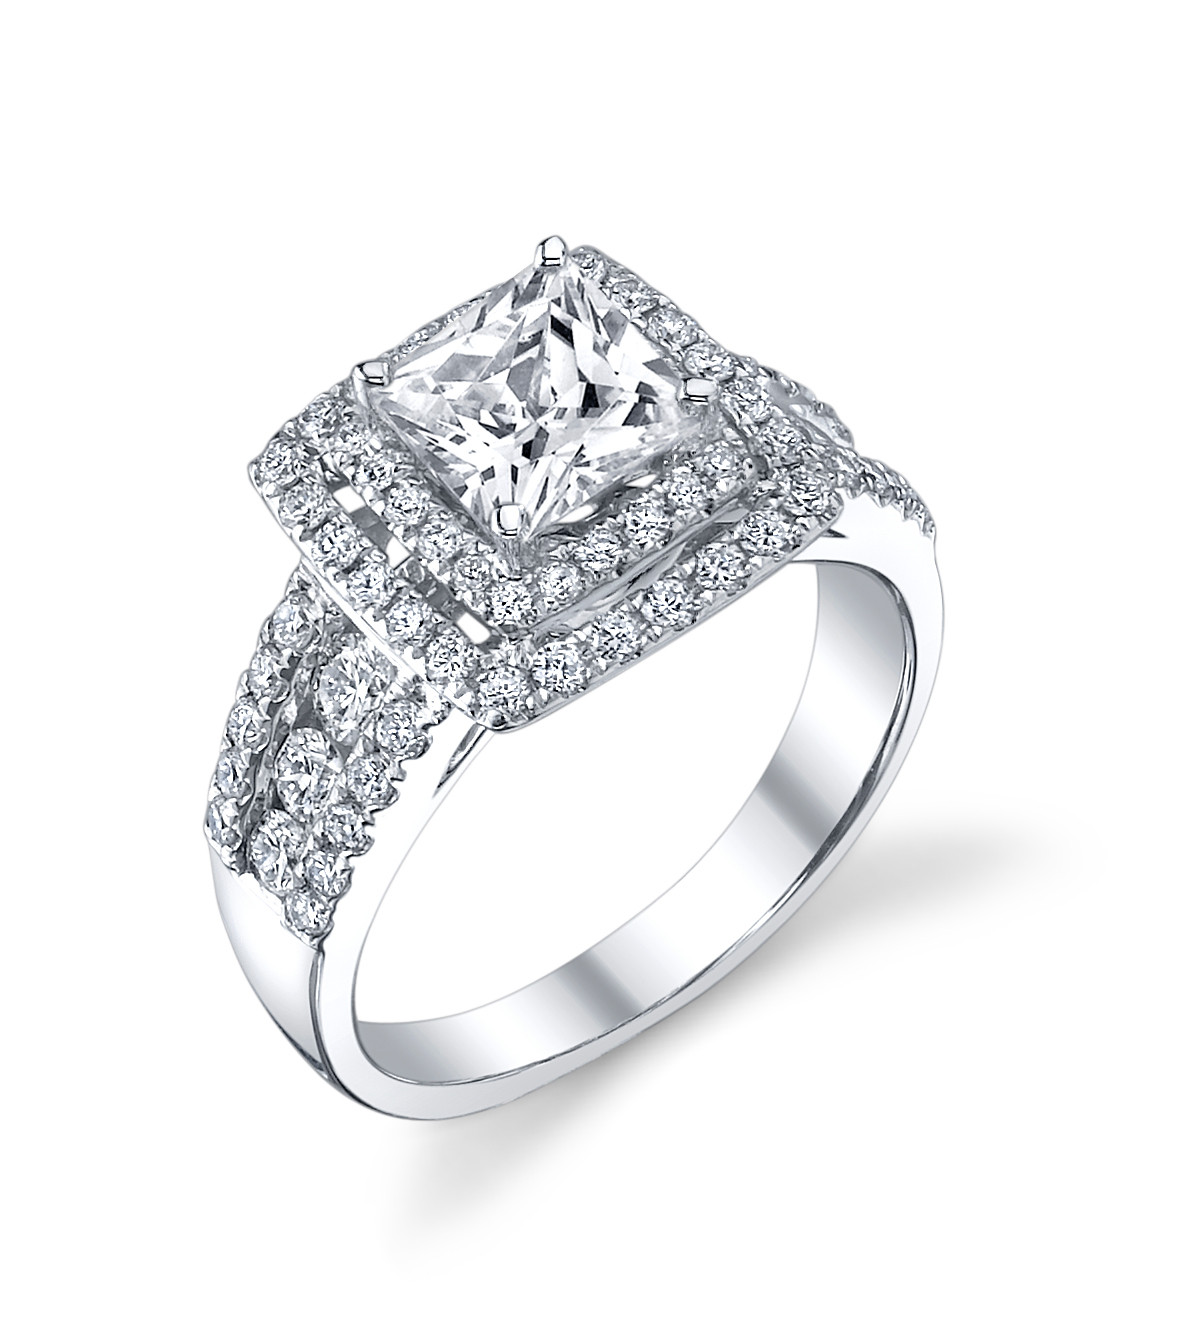 Princess Cut With Halo Engagement Rings
 Double Halo Princess Cut Engagement Ring